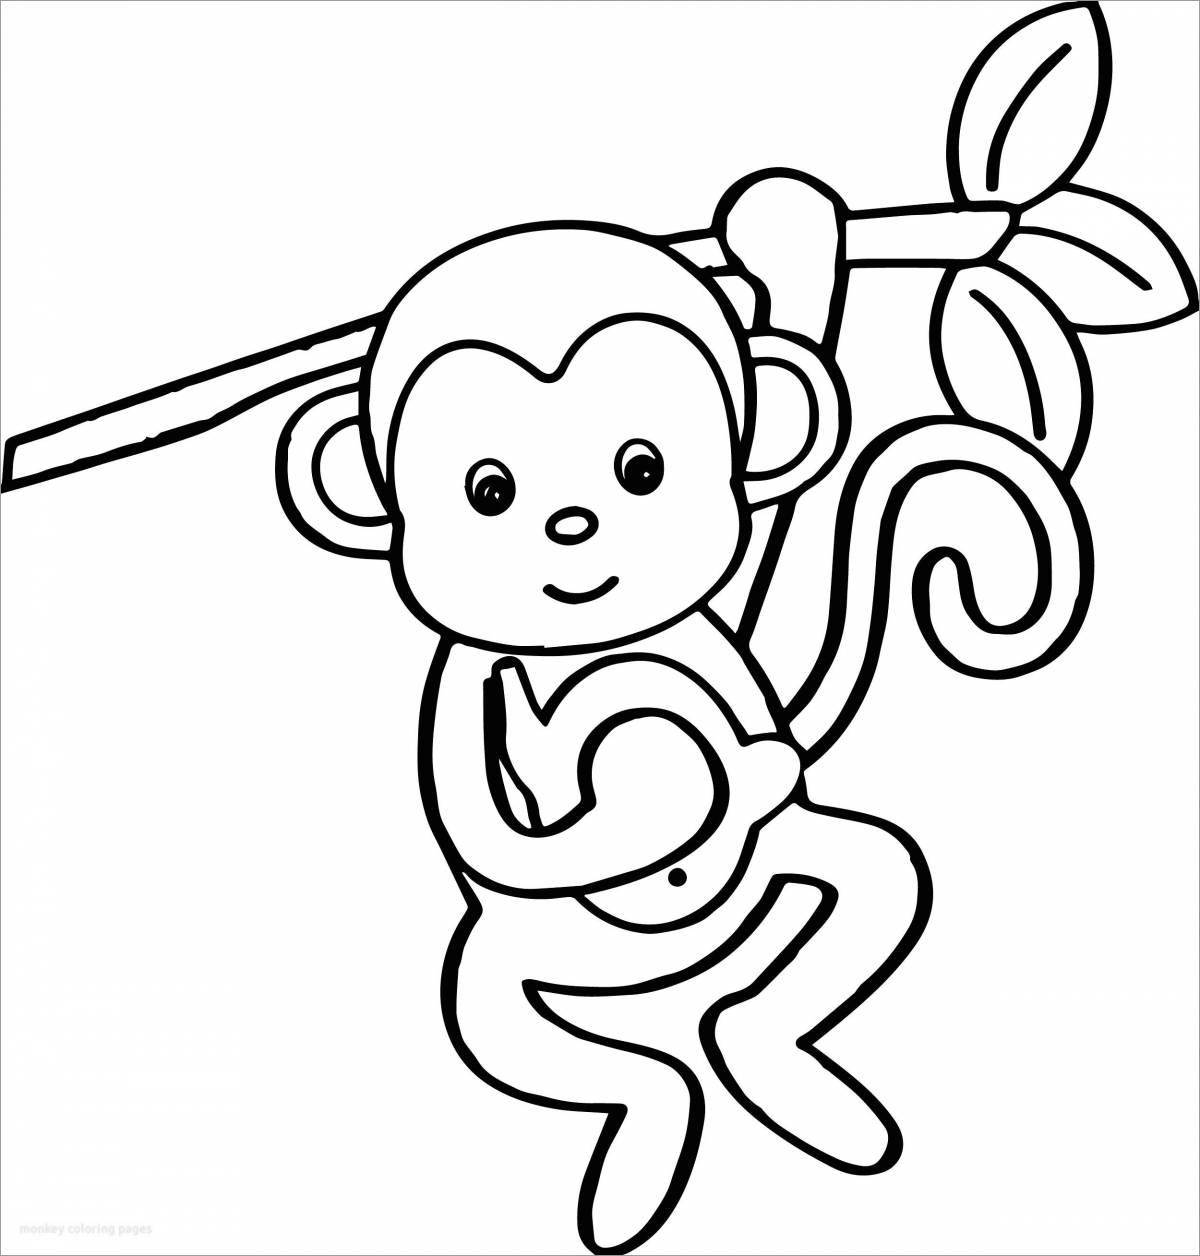 Playable monkey coloring book for kids